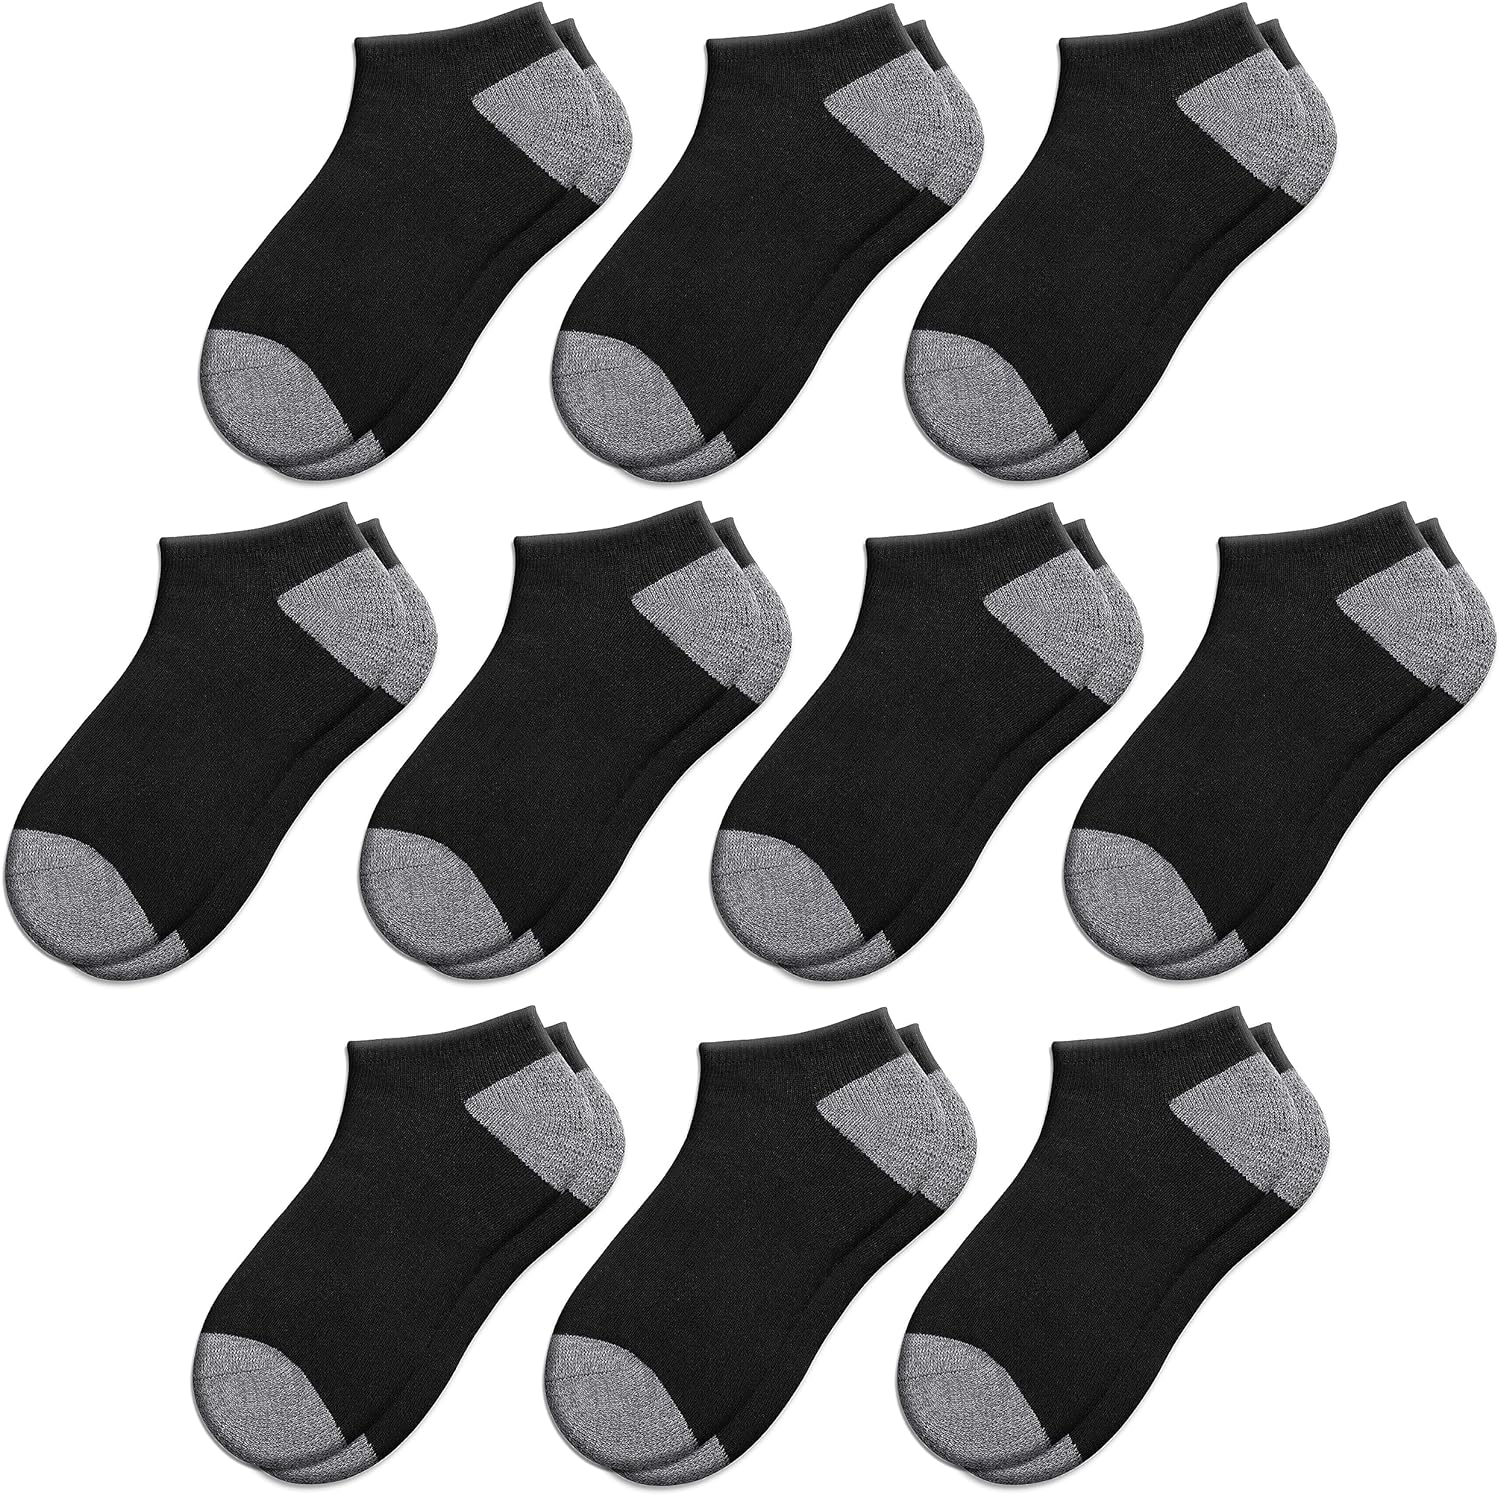 Comfoex 10 Pairs Boys Socks 4-6 6-8 8-10 Years Old Low Cut Ankle Athletic Socks For Kids Short Half Cushioned Socks